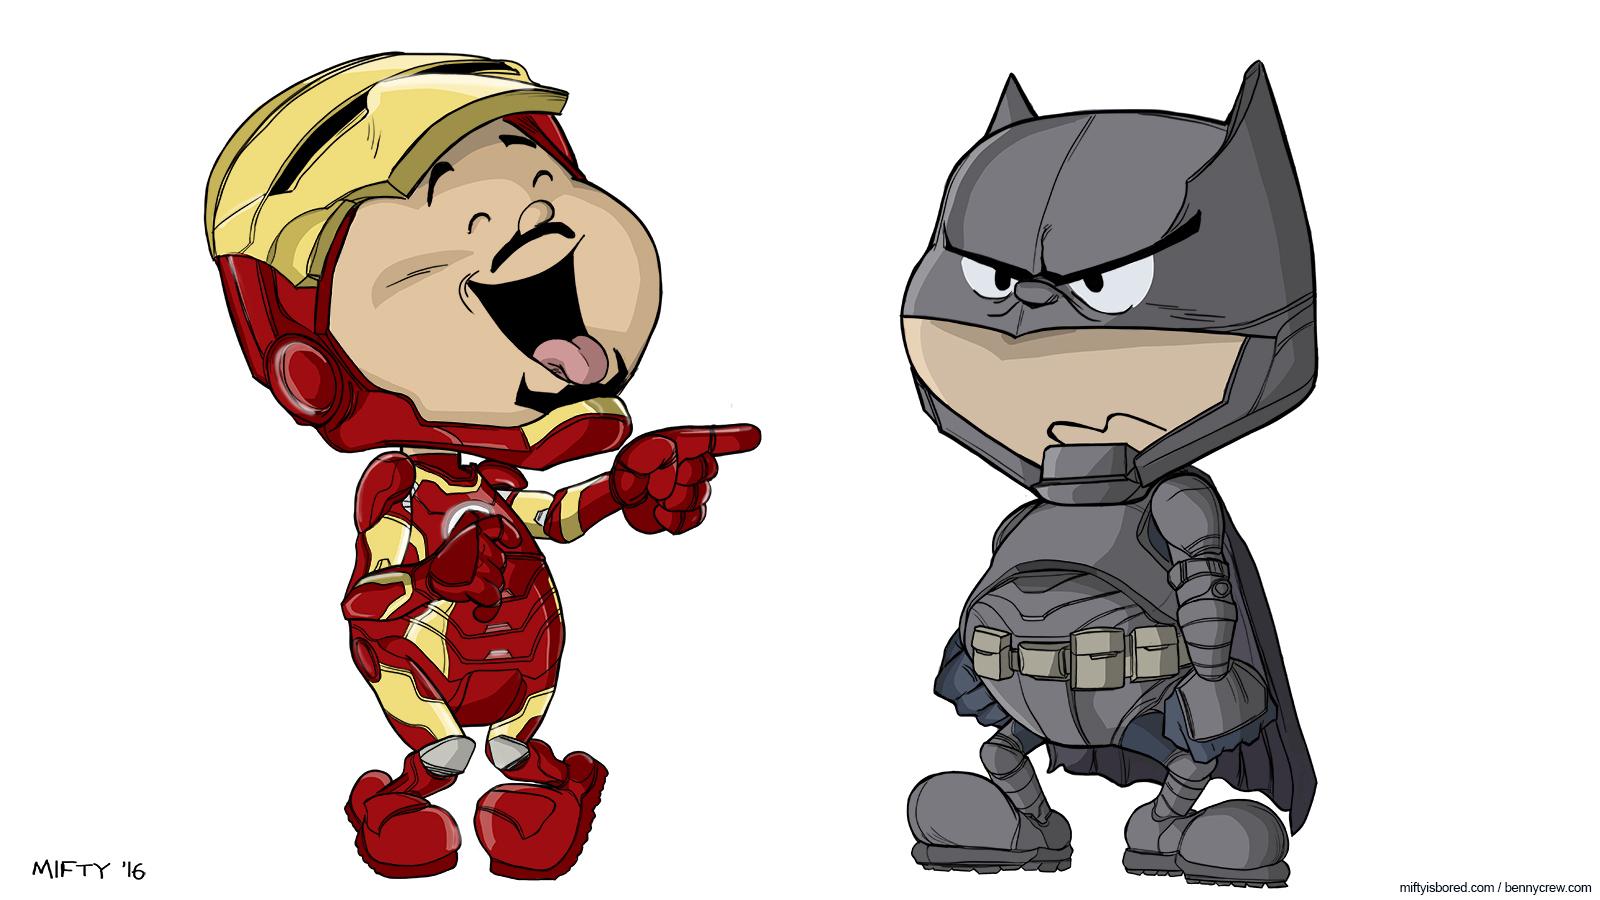 Batman vs Iron Man: Who wore the armor better? is Bored